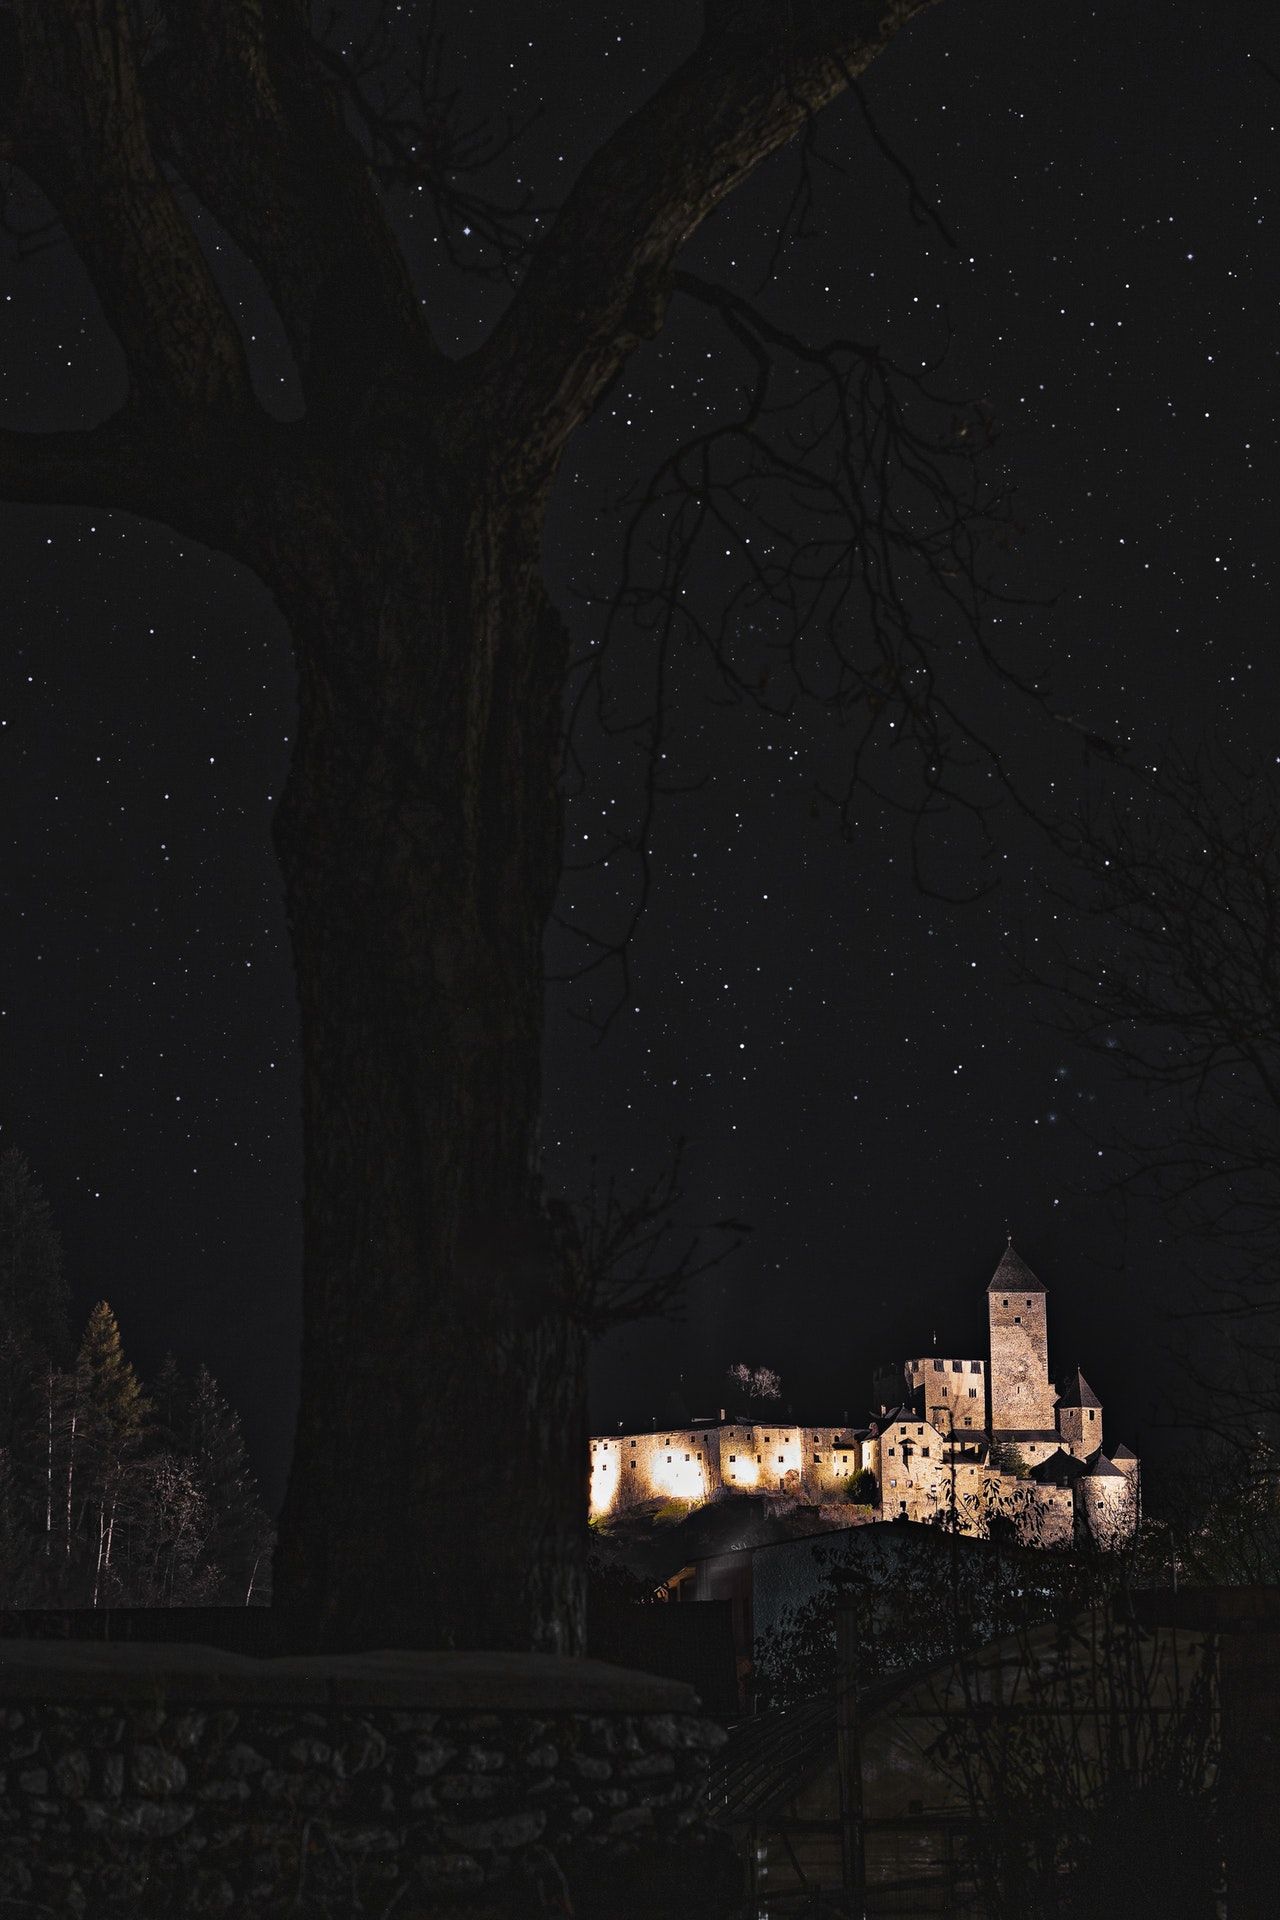 Beautiful wallpaper with castle and trees in the night